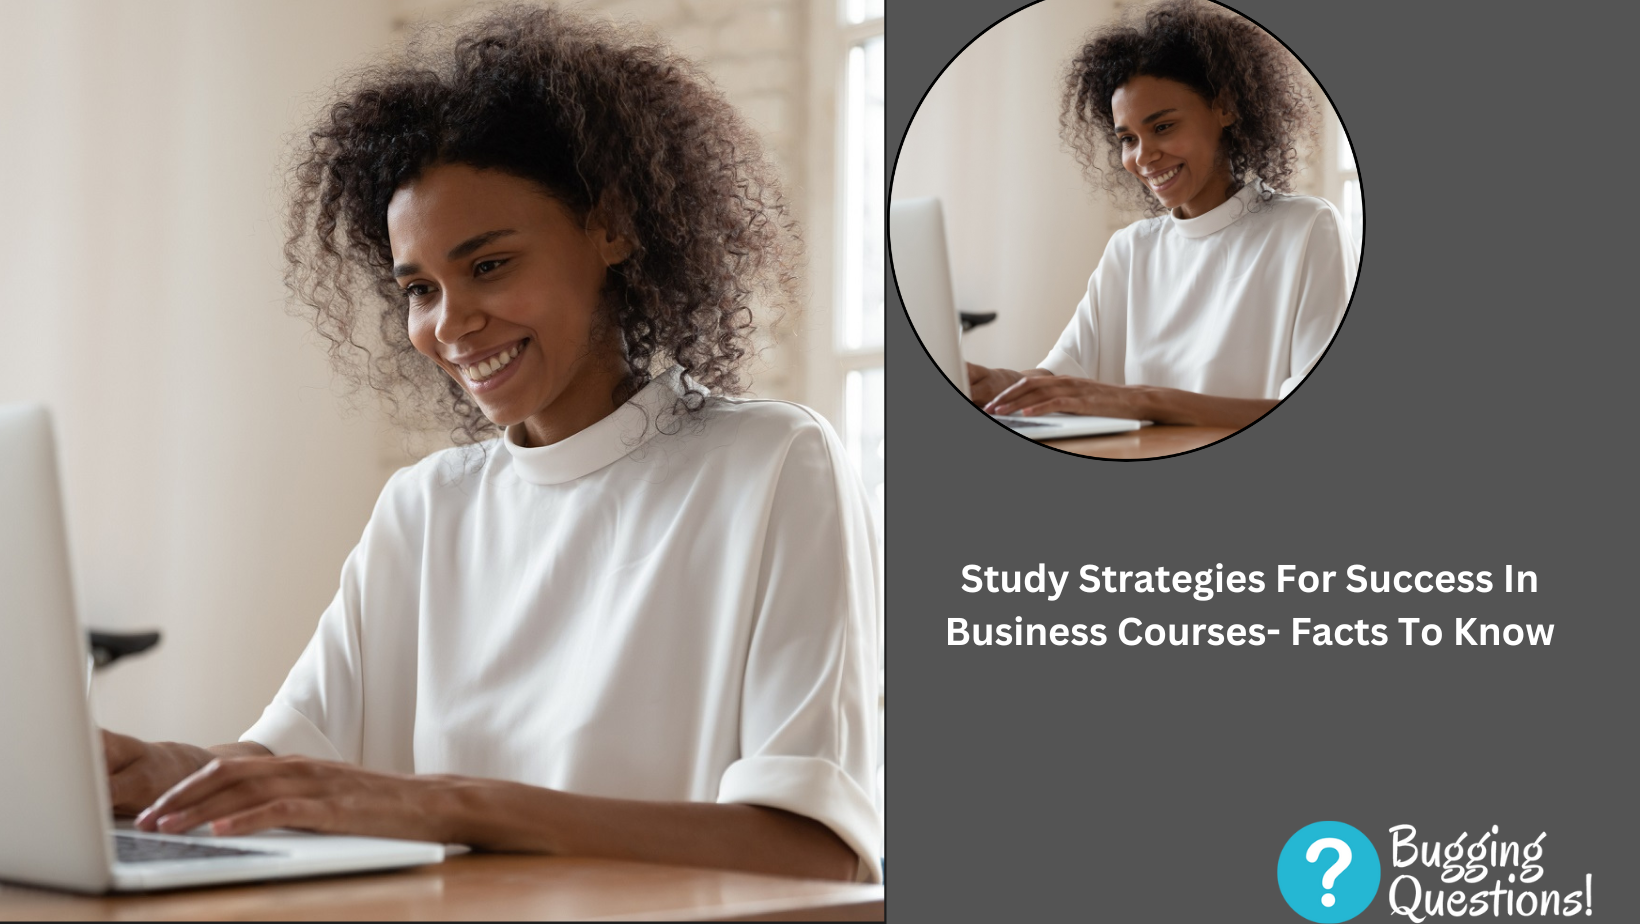 Study Strategies For Success In Business Courses